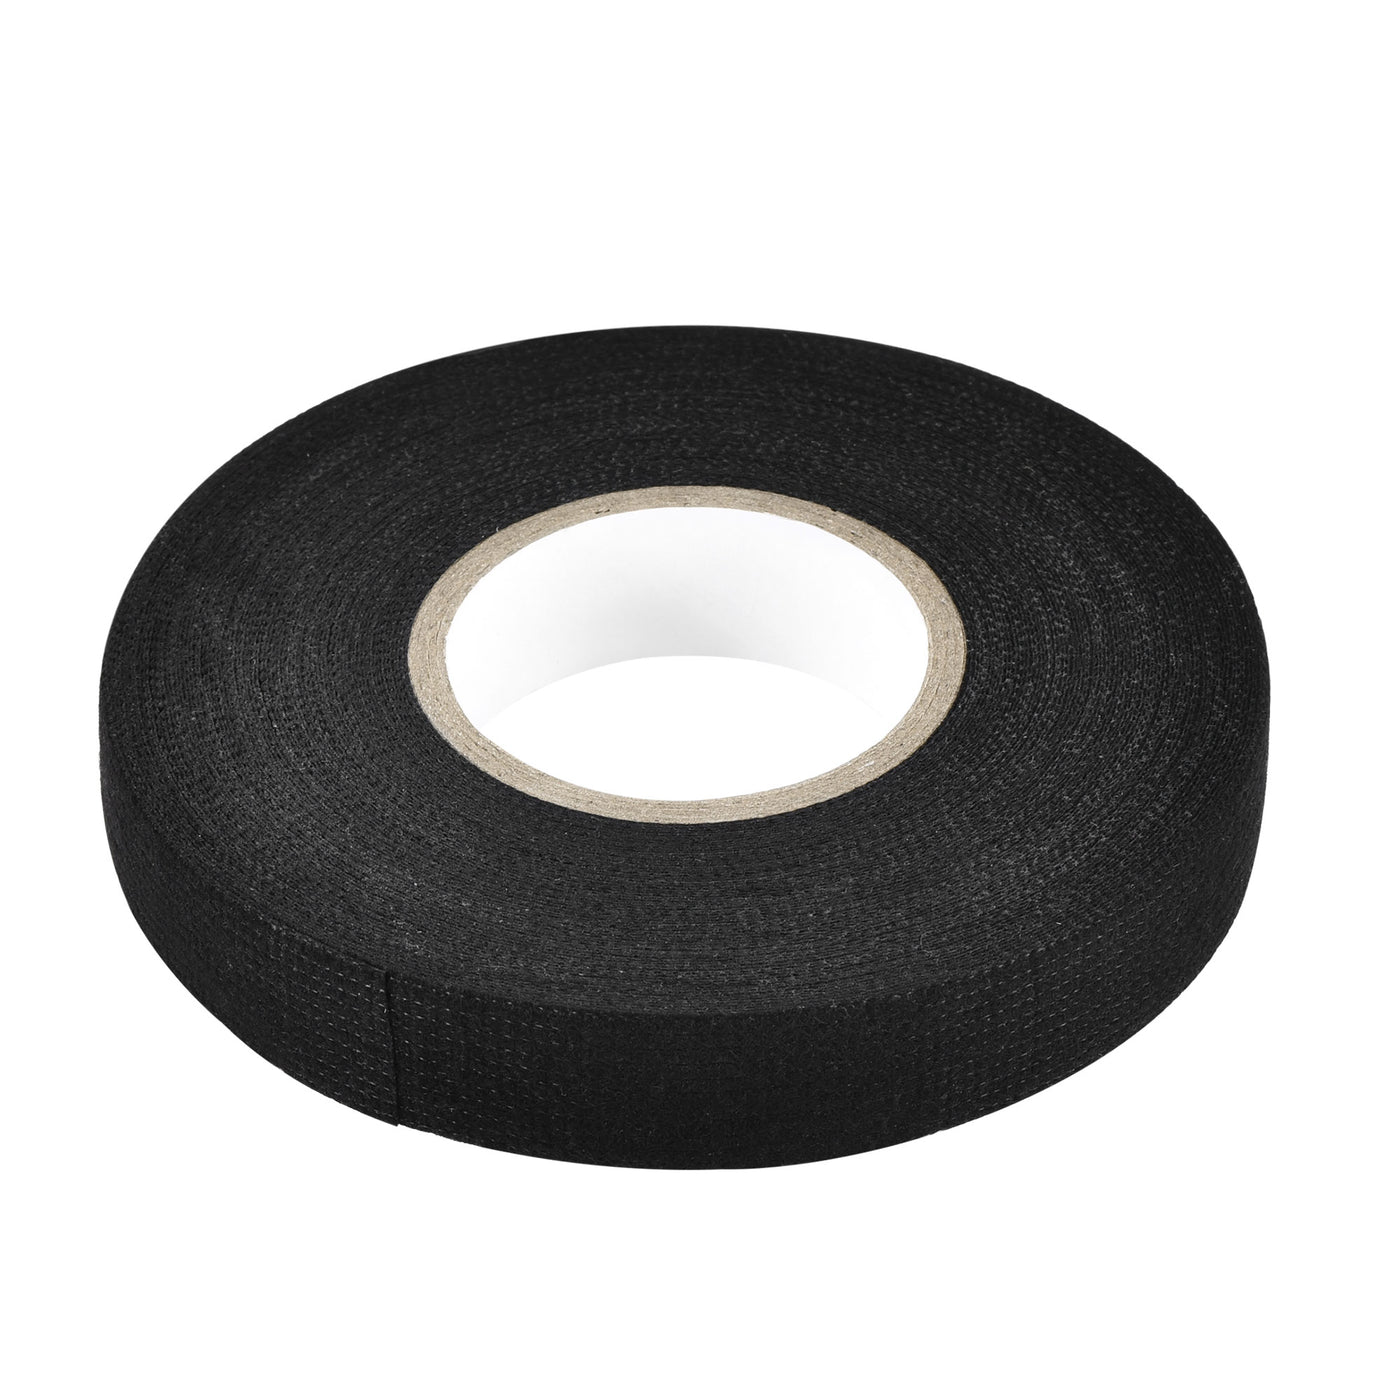 uxcell Uxcell Adhesive Cloth Fabric Tape Wire Harness Looms Single-Side 15mm x 15m Black 2 Pcs